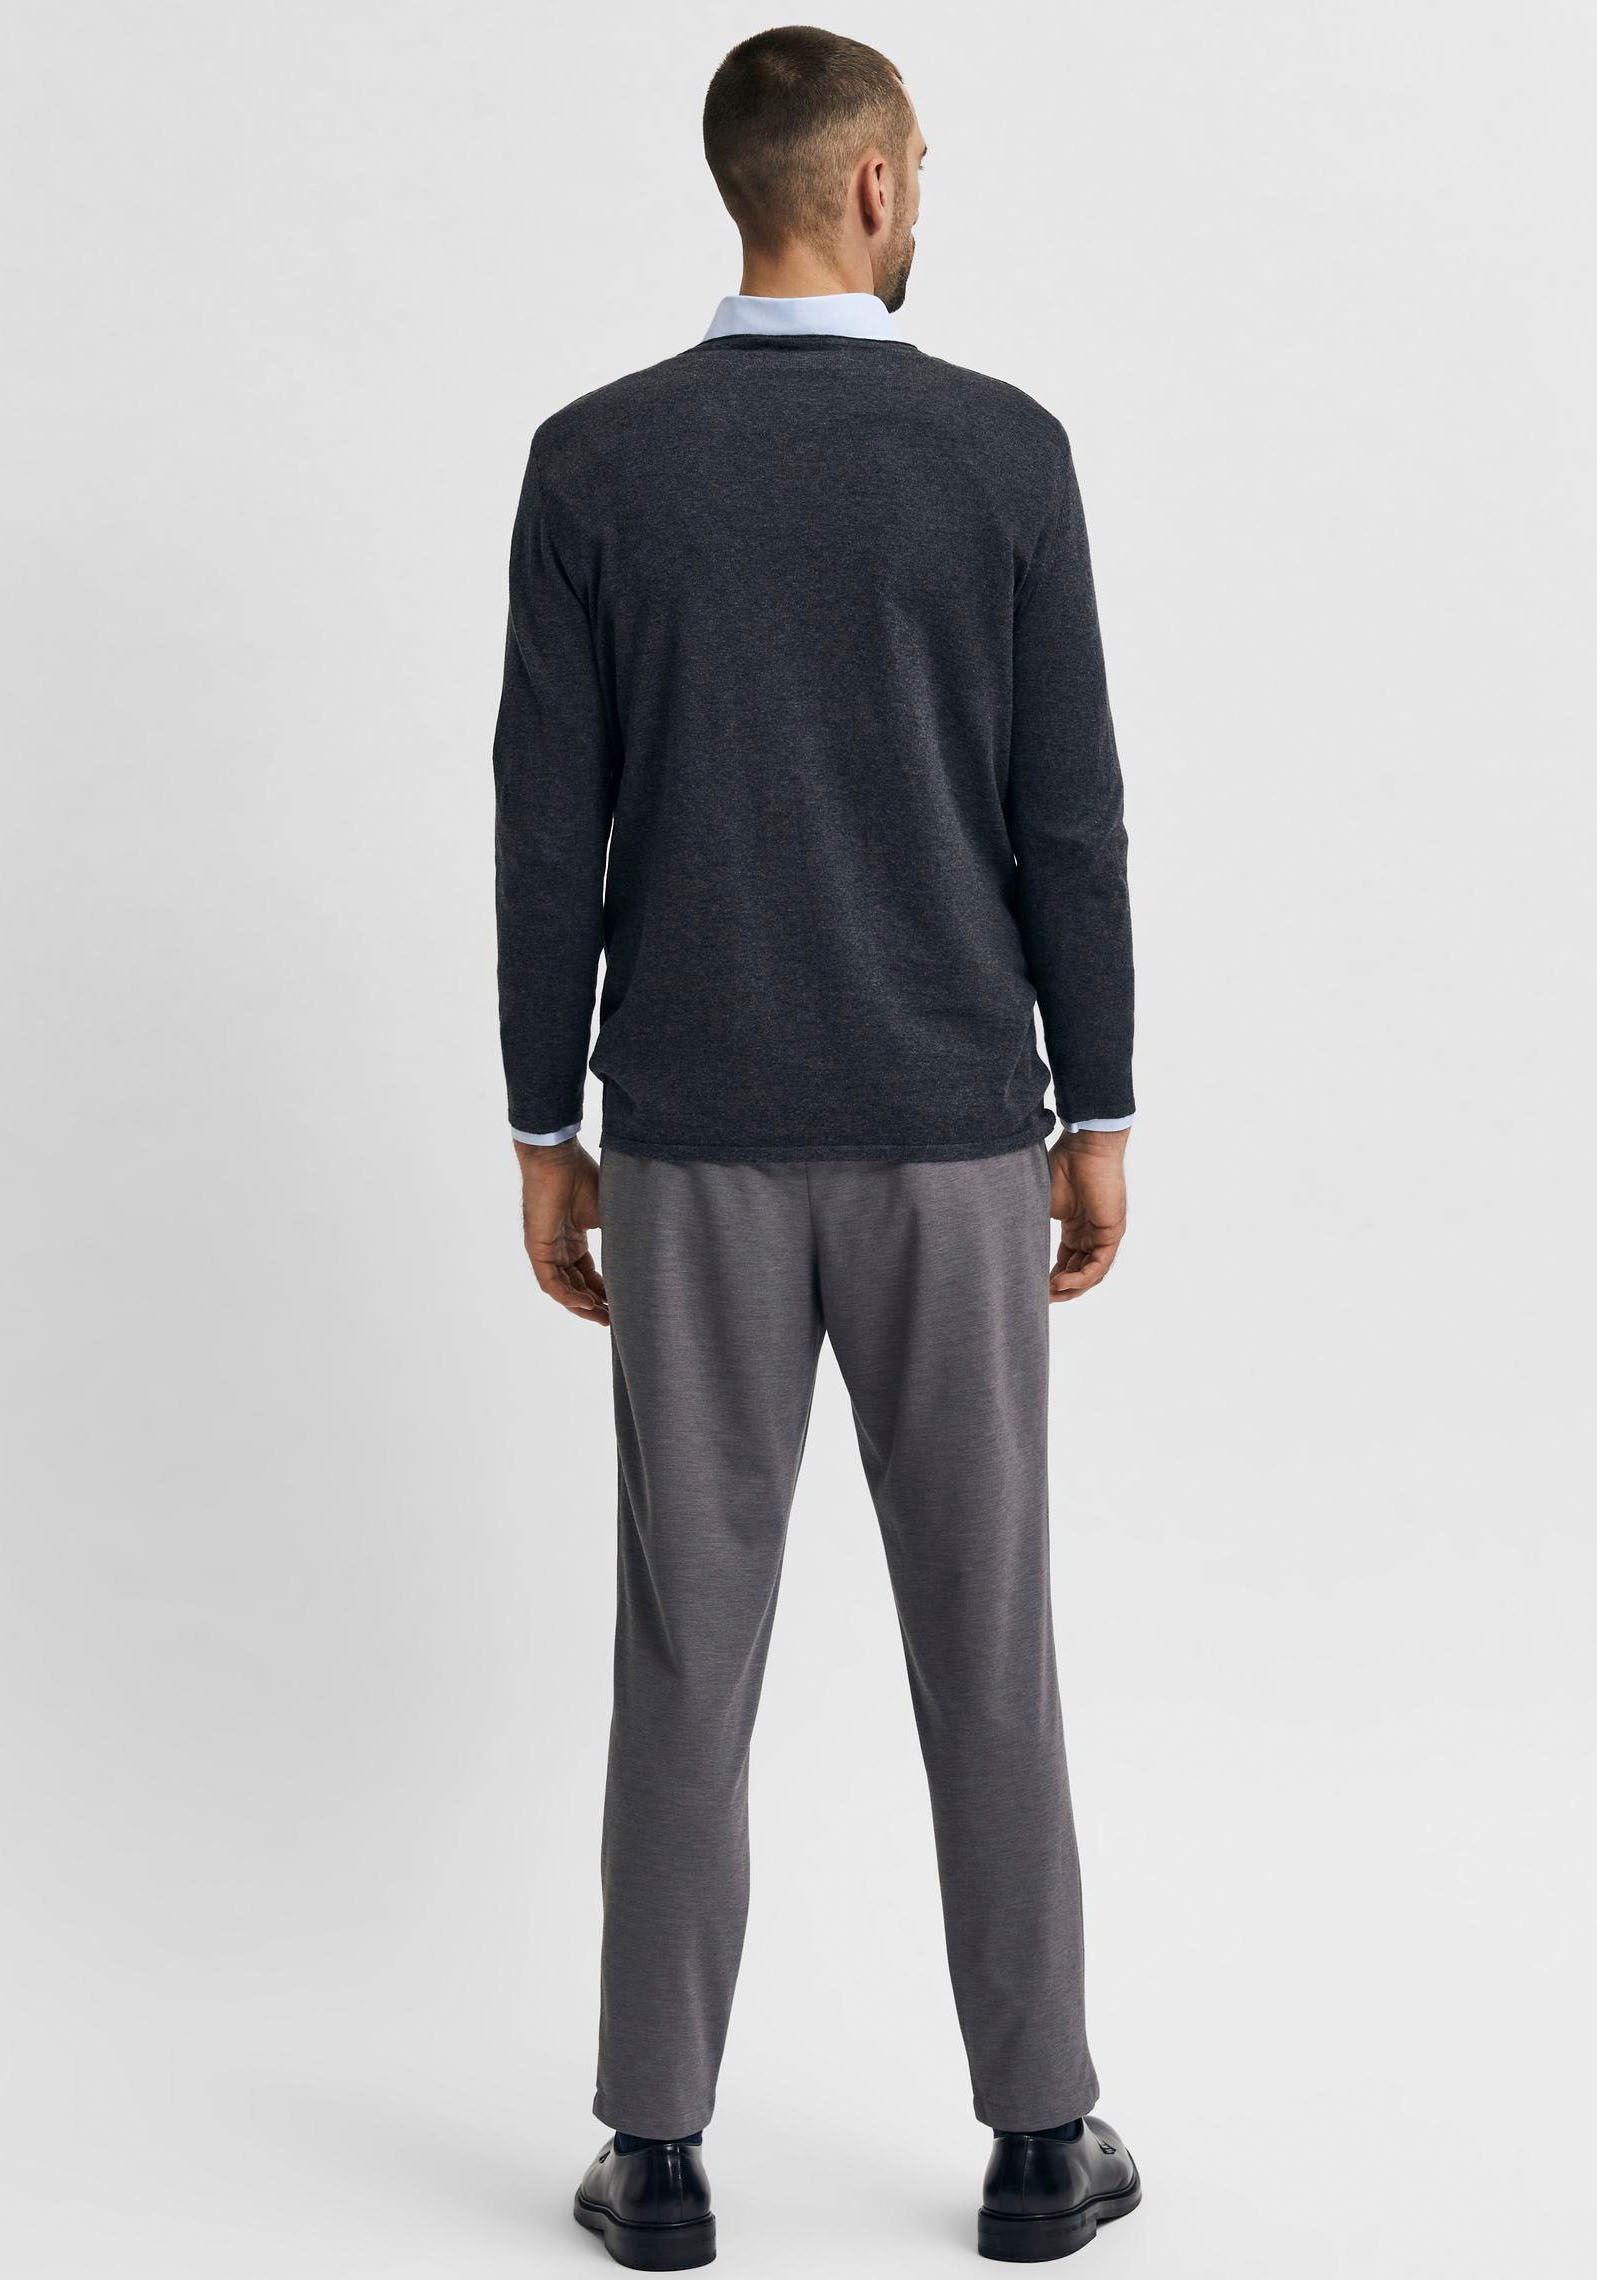 SELECTED HOMME Rundhalspullover »ROME shoppen bei OTTO KNIT« online